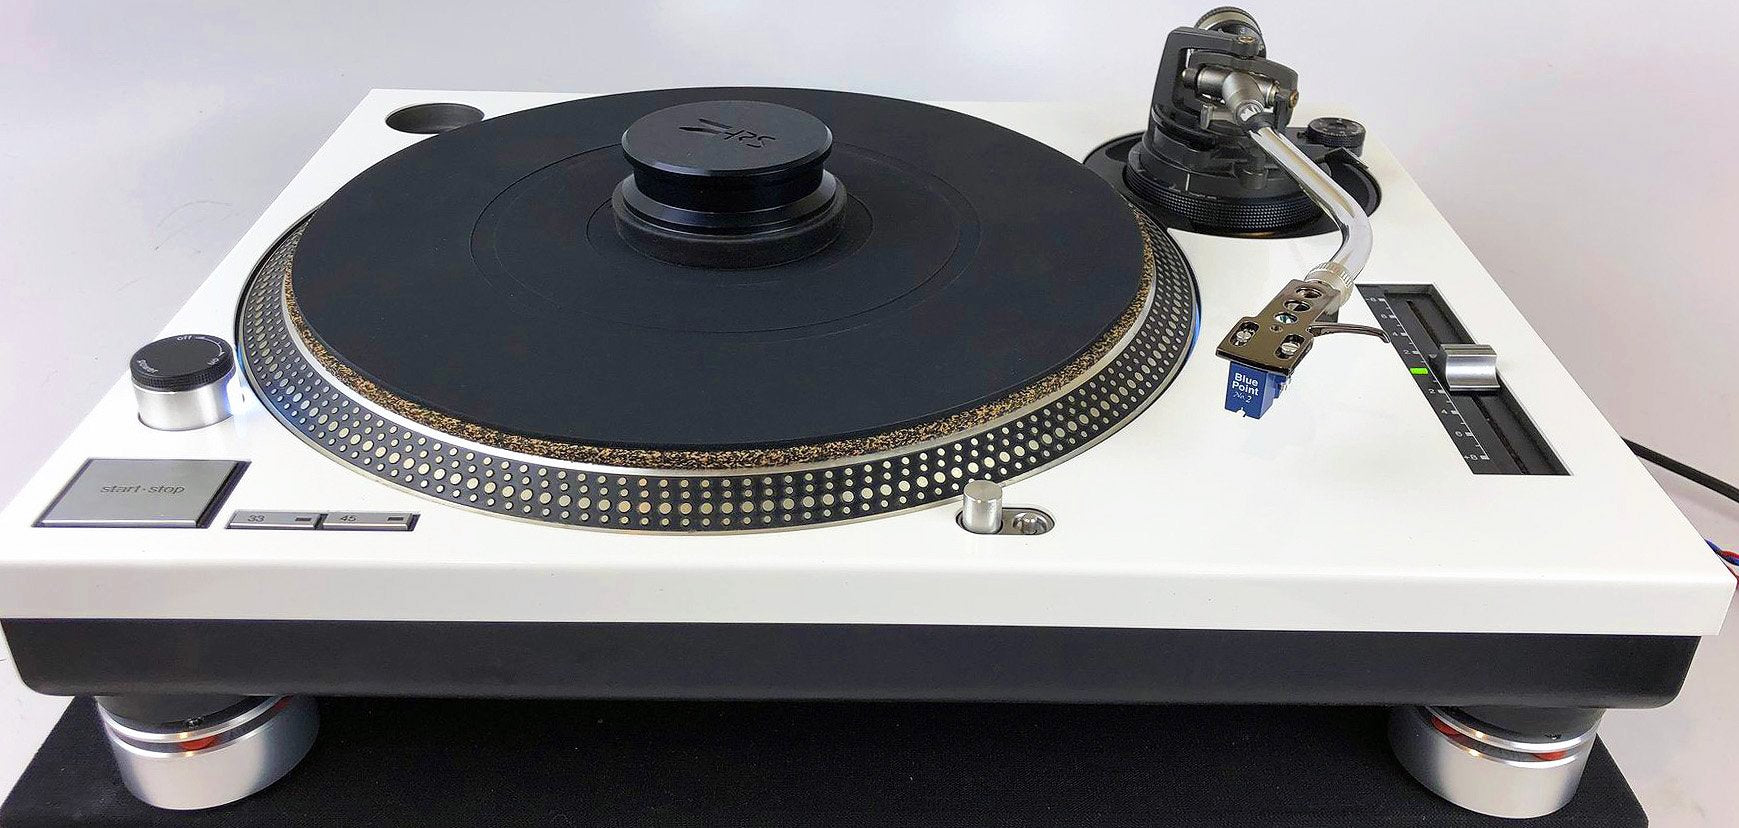 SkyFi Feature from Sound & Vision! "The Mighty Technics SL-1200"